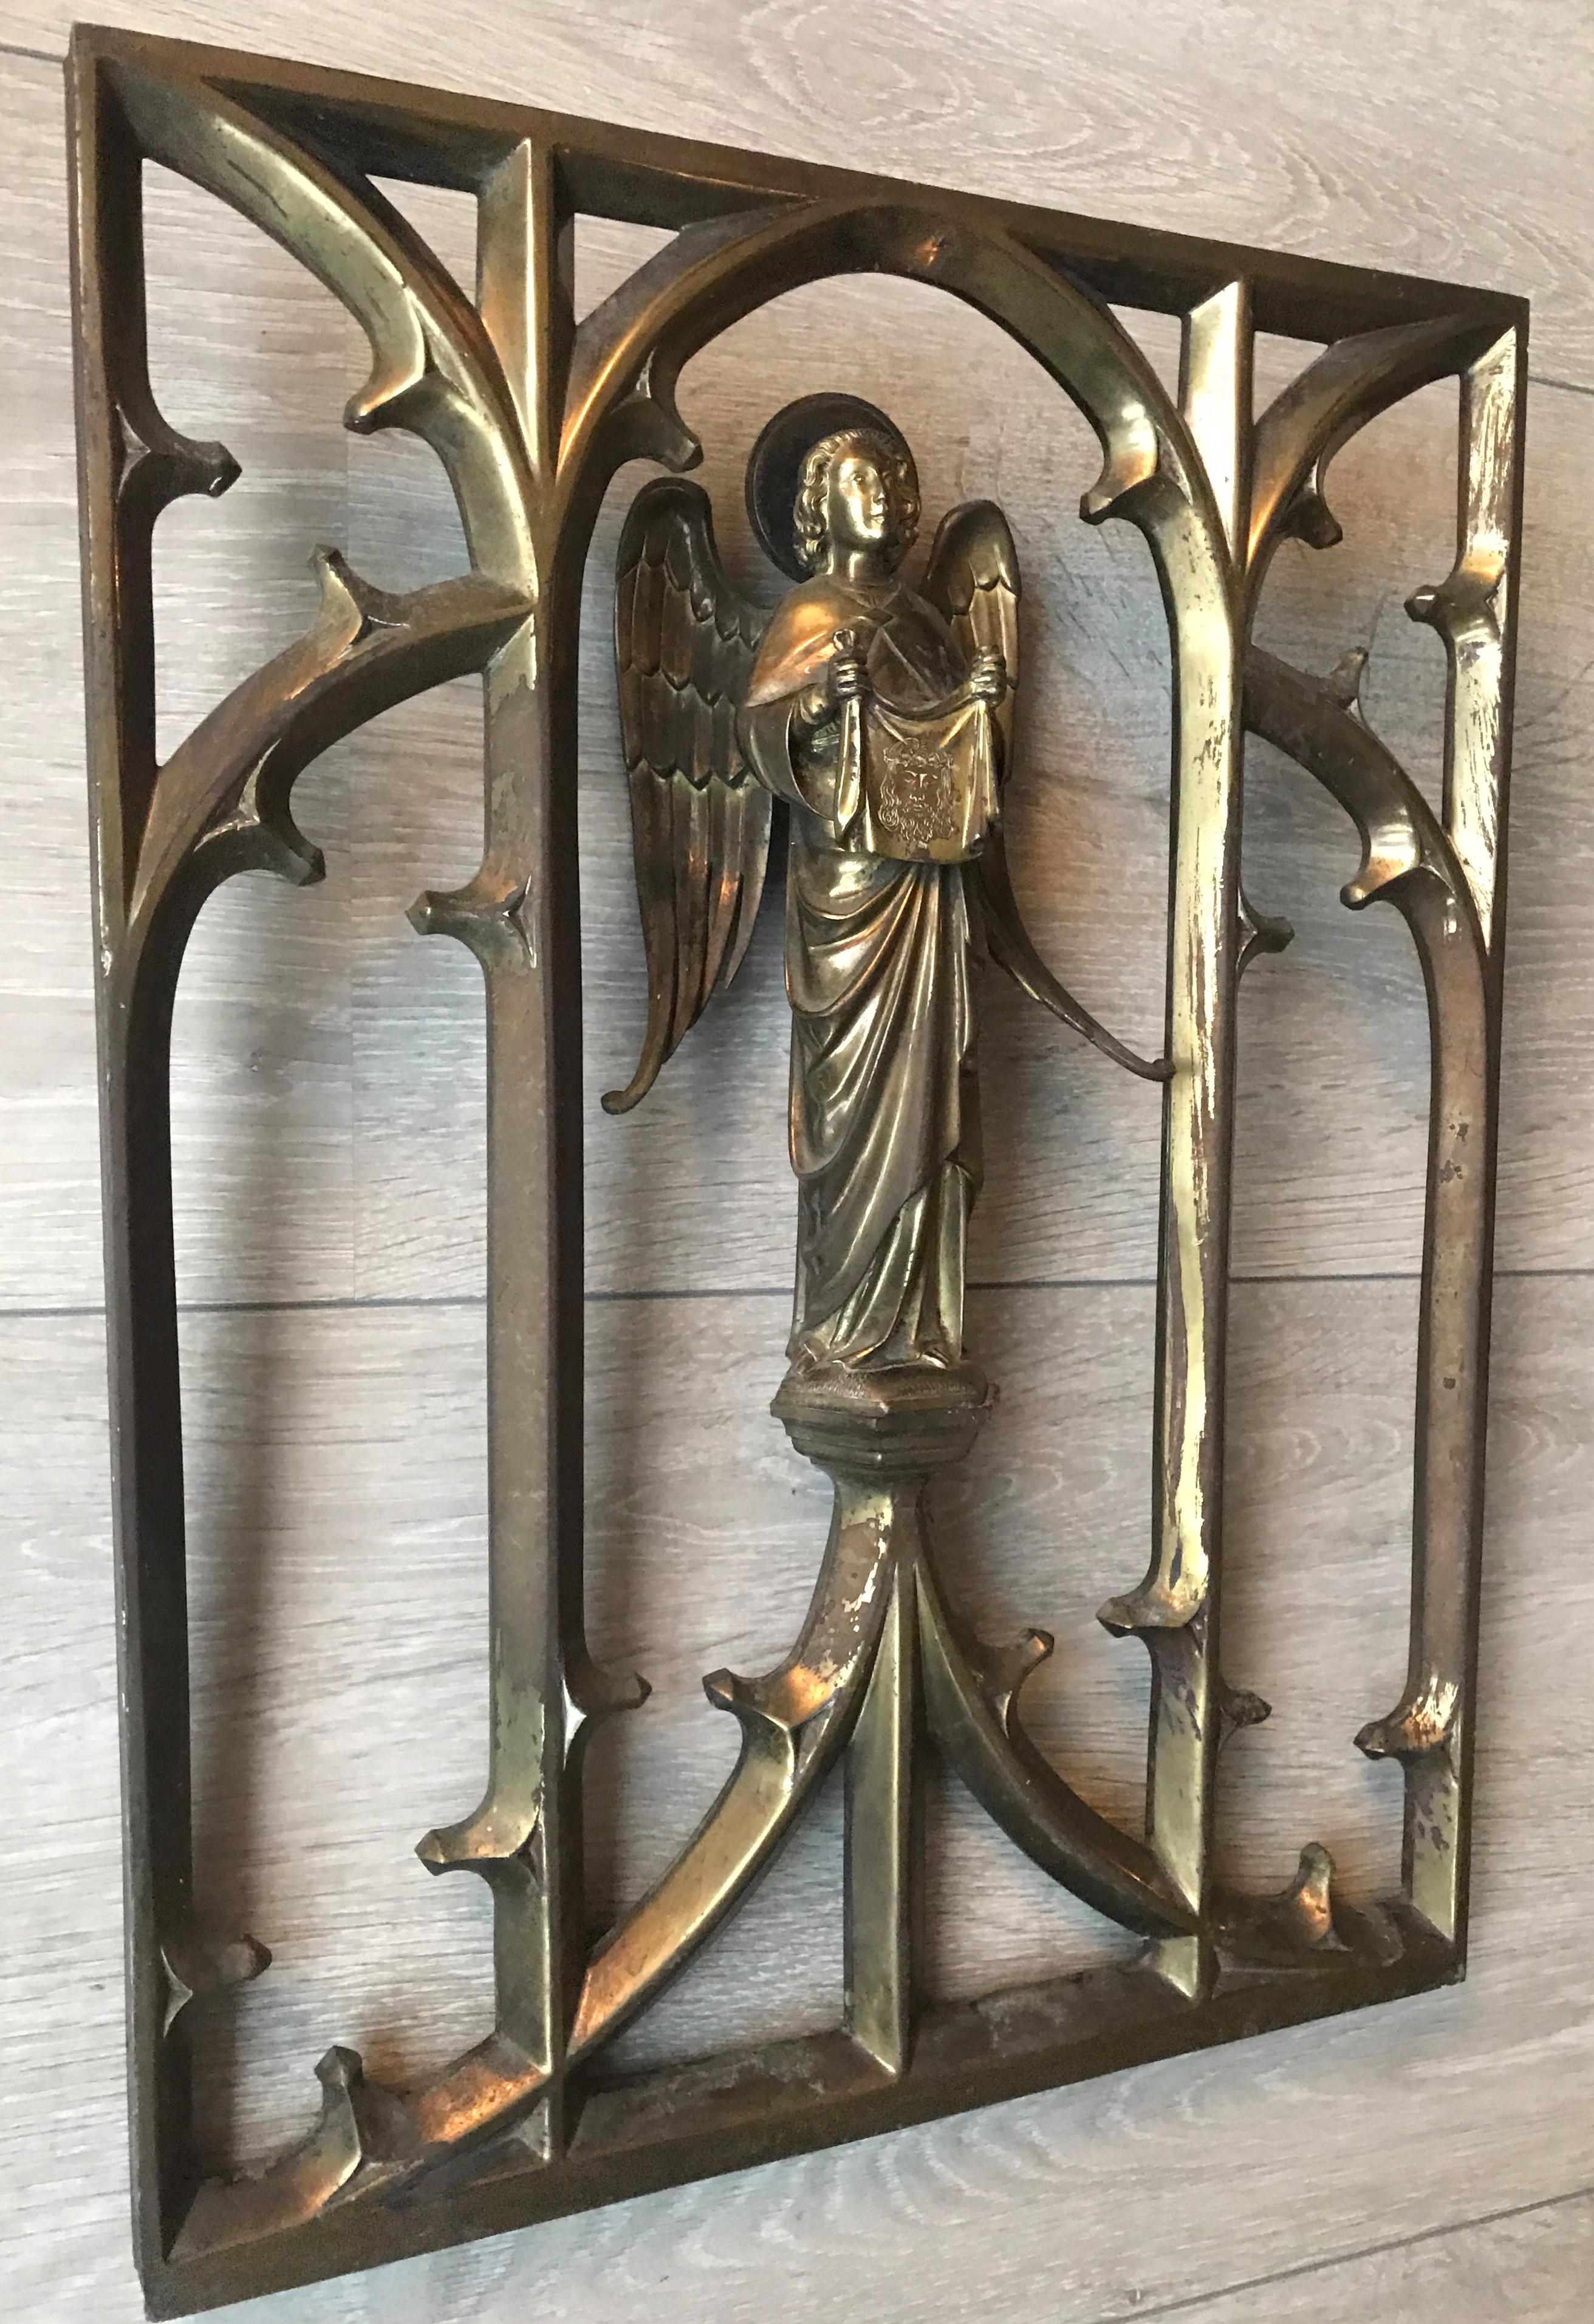 Heavy bronze Gothic church window frame with a Saint Veronica sculpture.

This incredibly well made and strong, bronze window frame with a sizable angel statue in the center is another one of our recent great finds. This rare and highly decorative